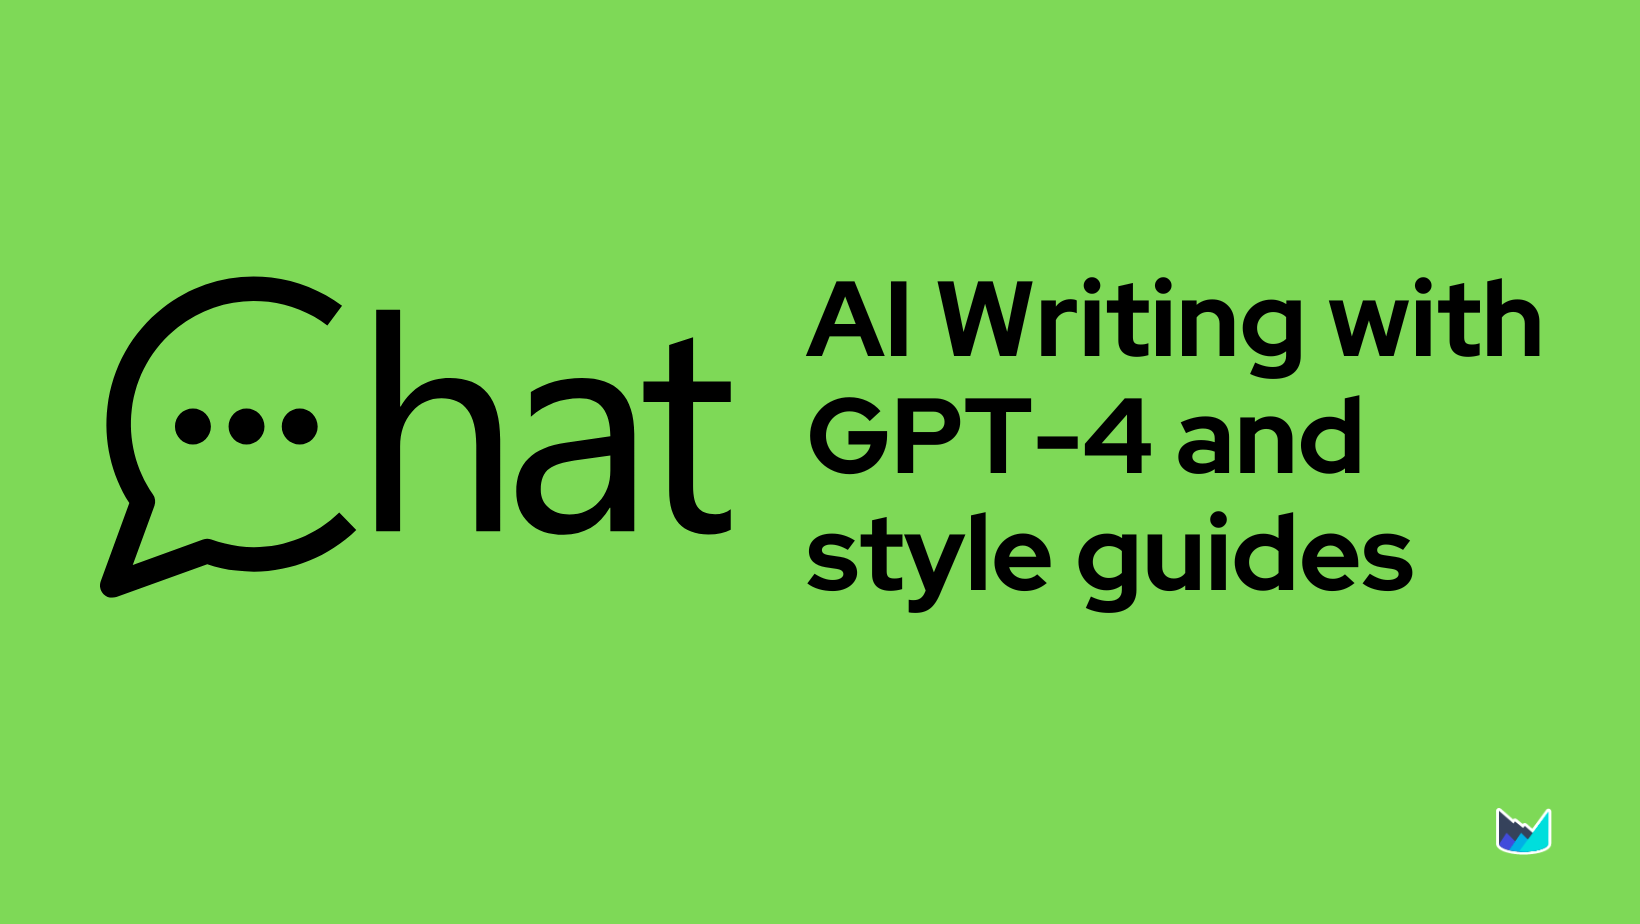 AI Writing with GPT-4 and style guides